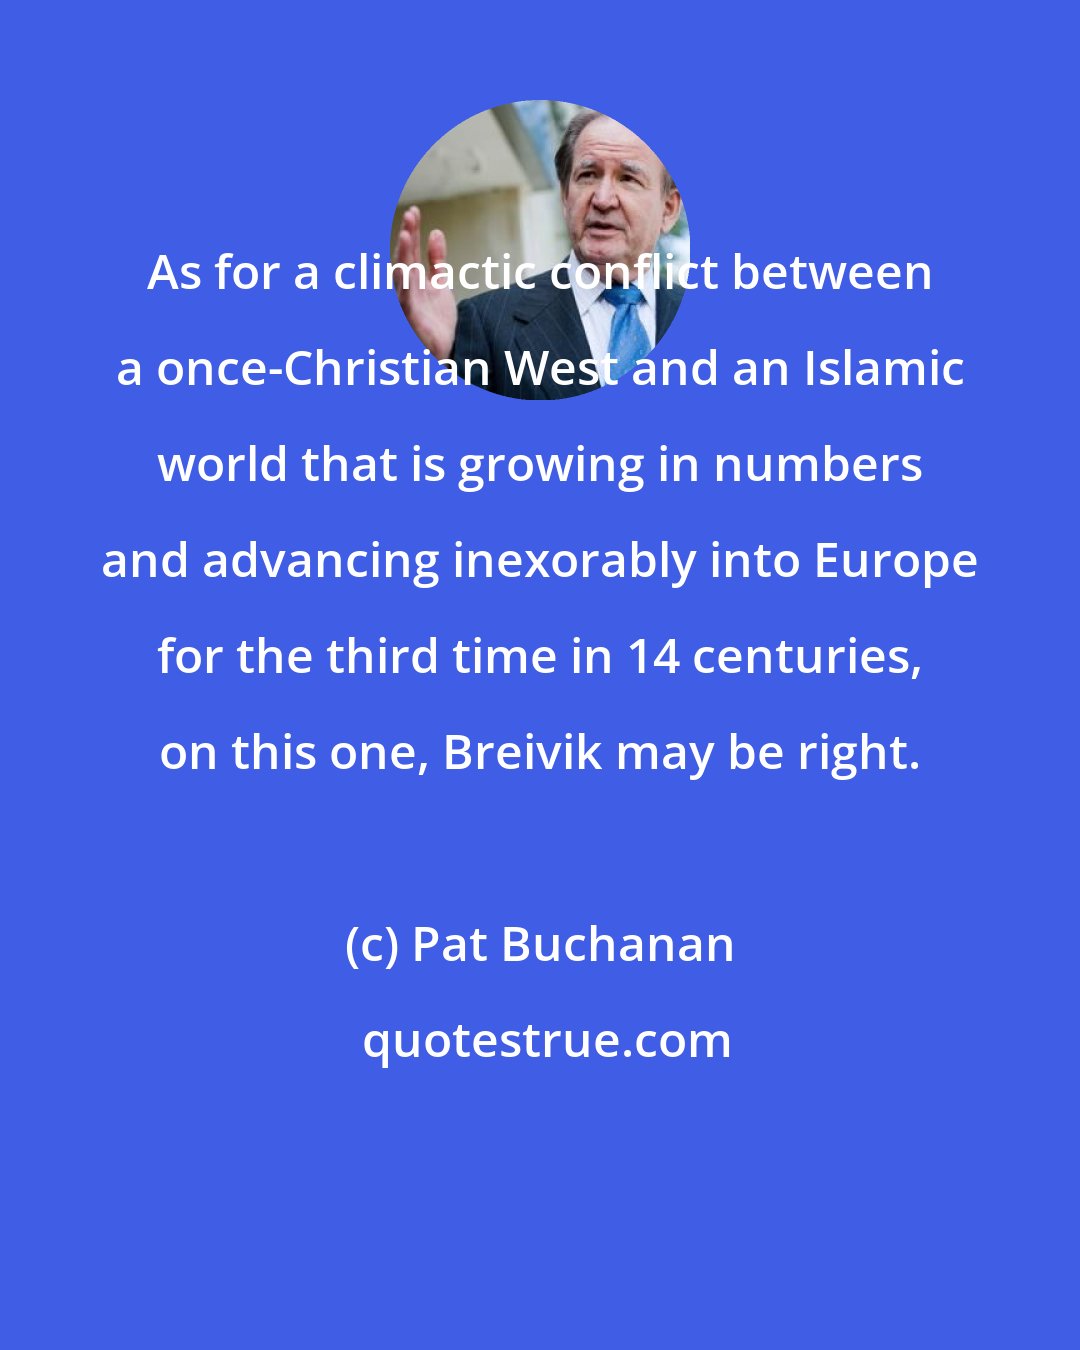 Pat Buchanan: As for a climactic conflict between a once-Christian West and an Islamic world that is growing in numbers and advancing inexorably into Europe for the third time in 14 centuries, on this one, Breivik may be right.